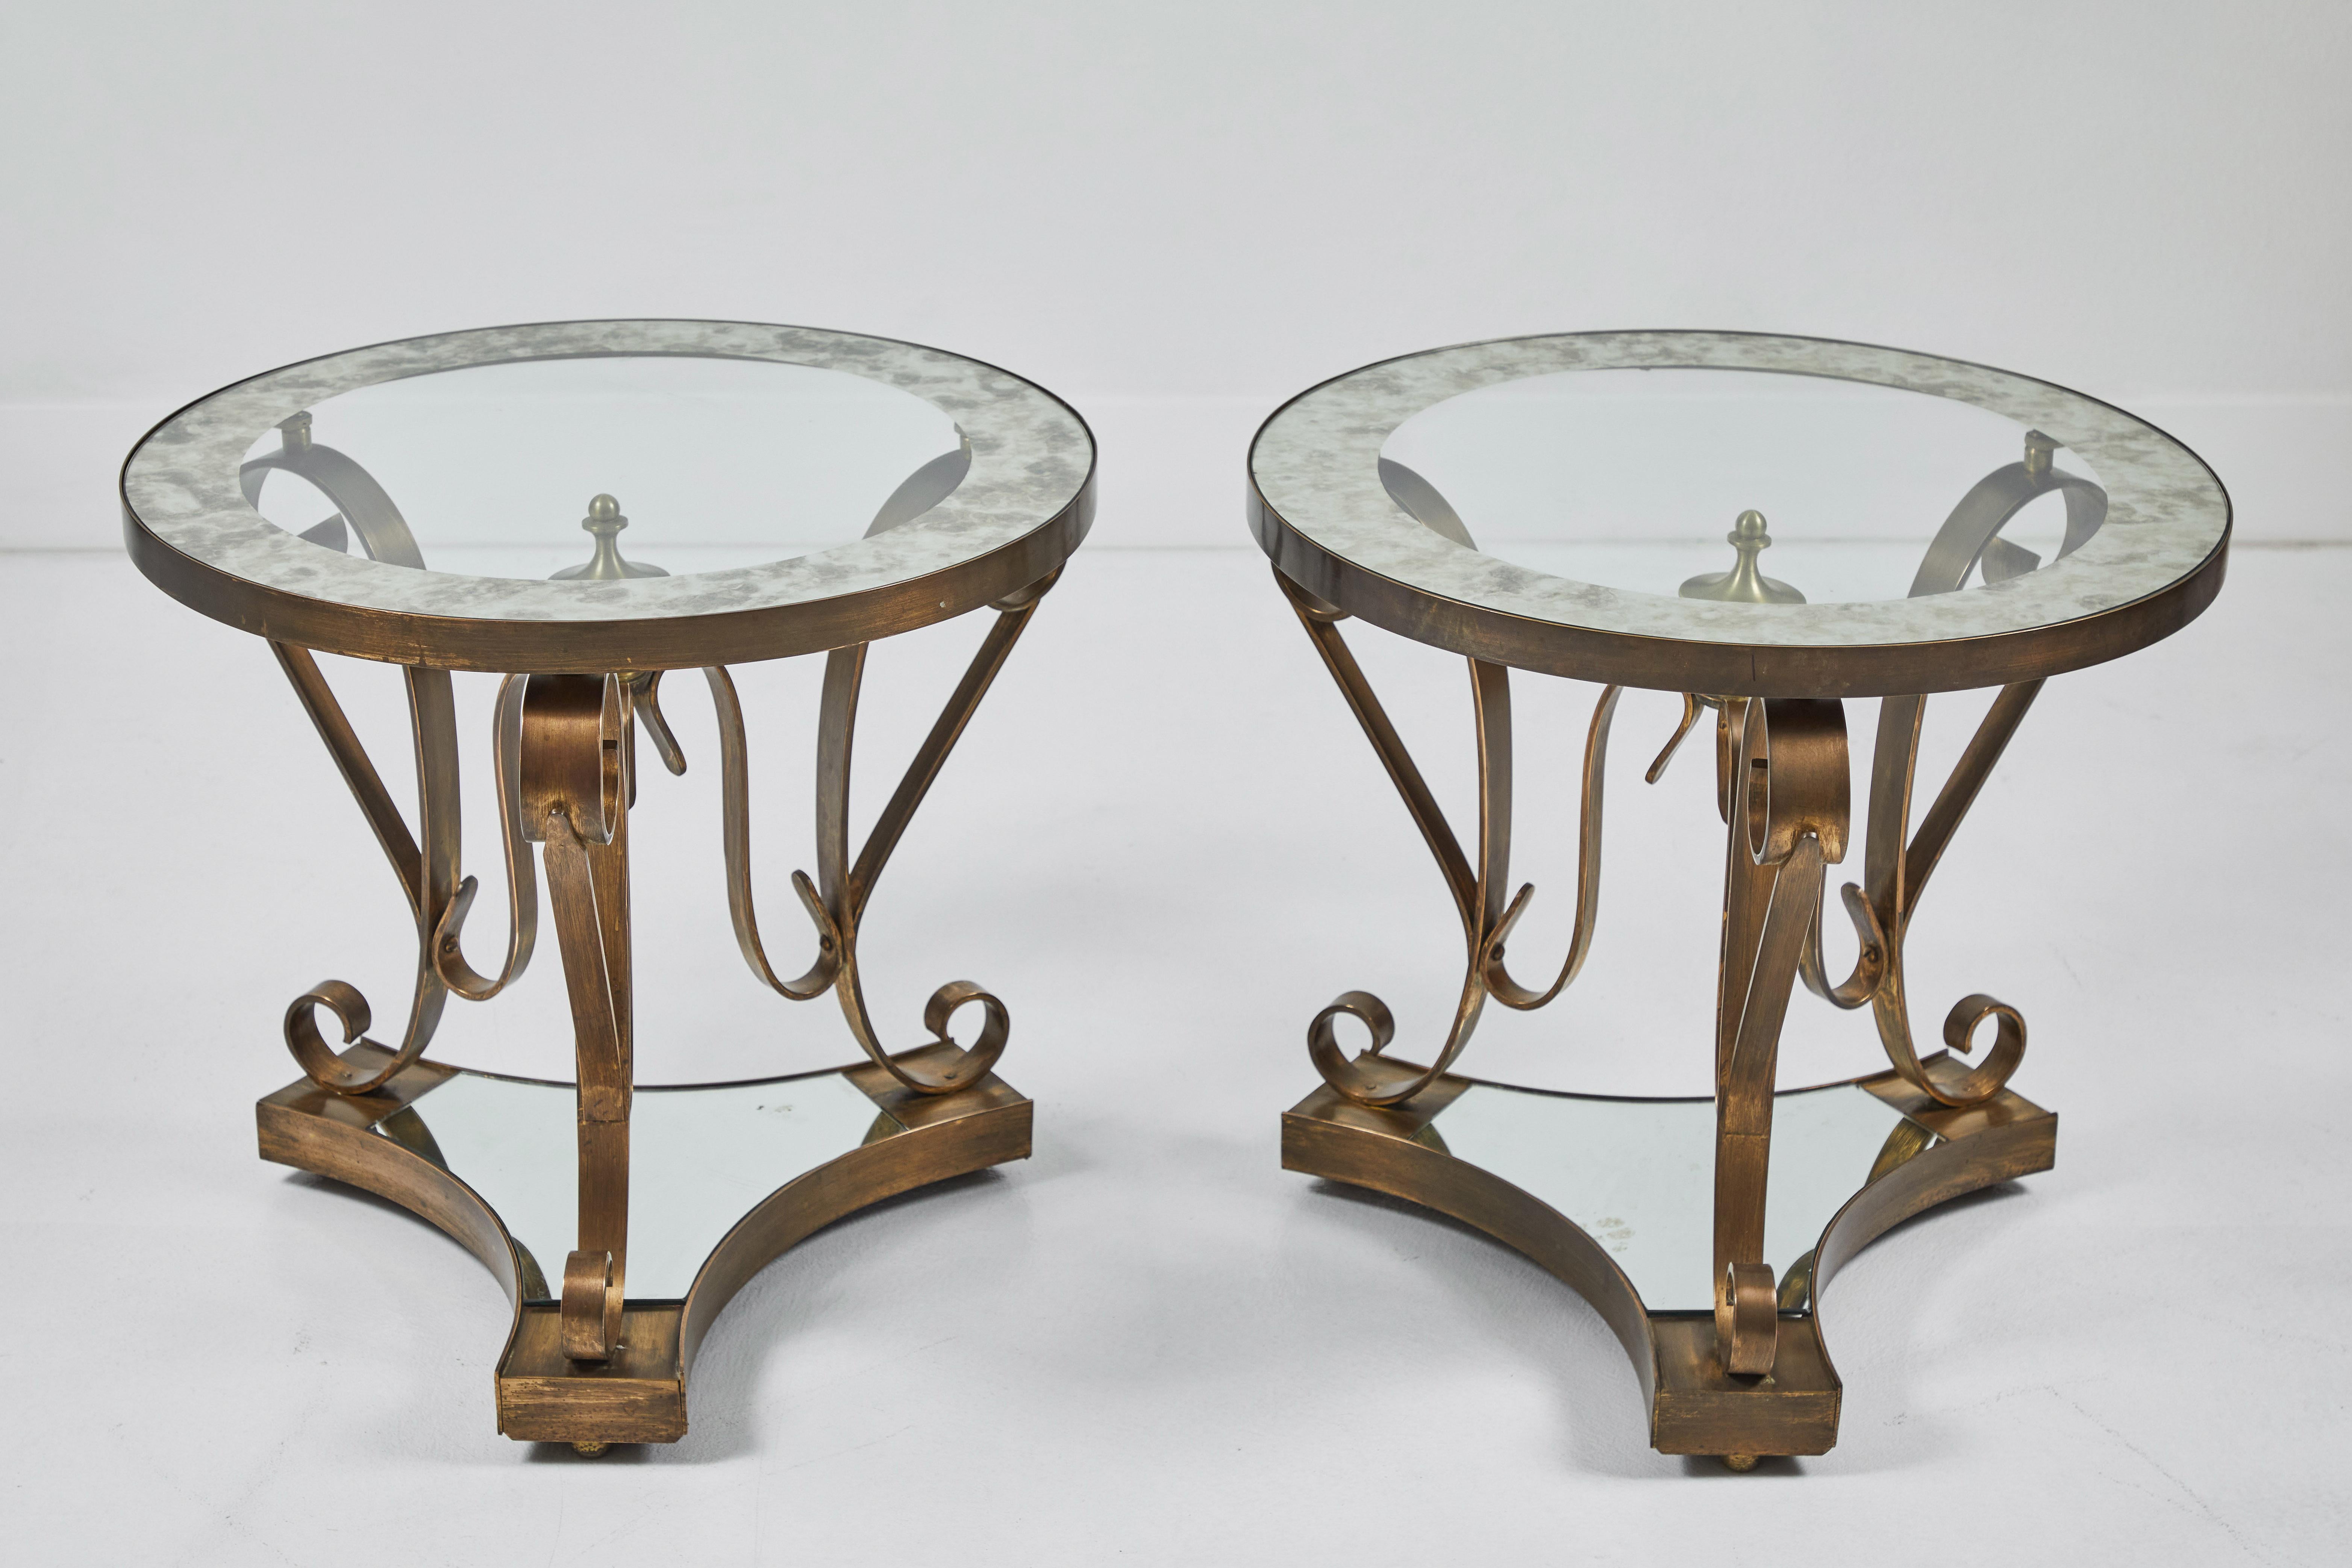 Hollywood Regency Pair of Patinated Brass and Mirrored Side Tables by Arturo Pani For Sale